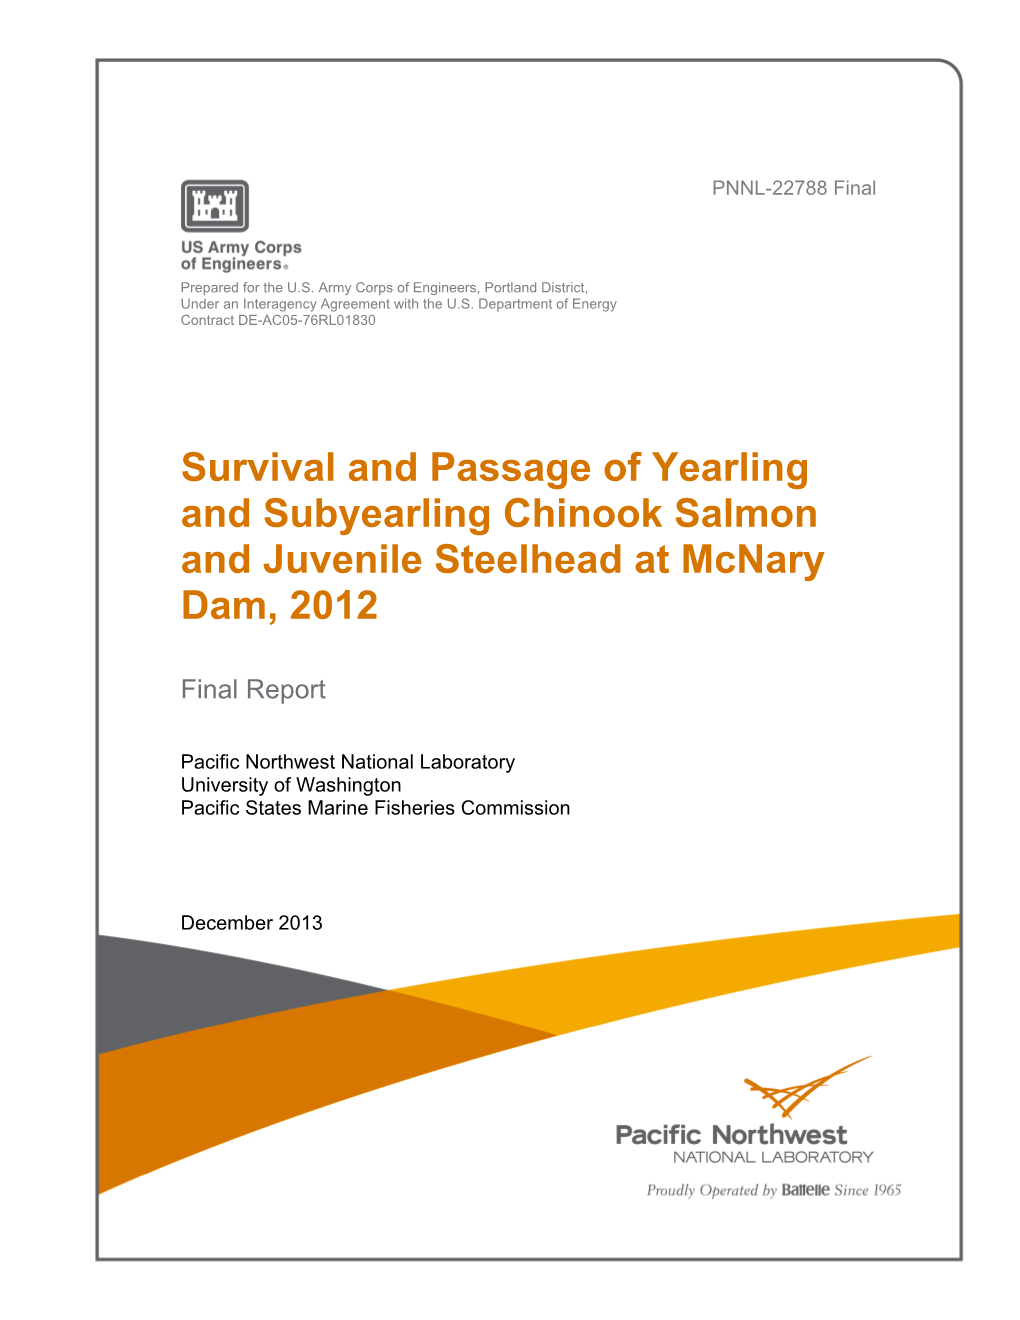 Survival and Passage of Yearling and Subyearling Chinook Salmon and Juvenile Steelhead at Mcnary Dam, 2012